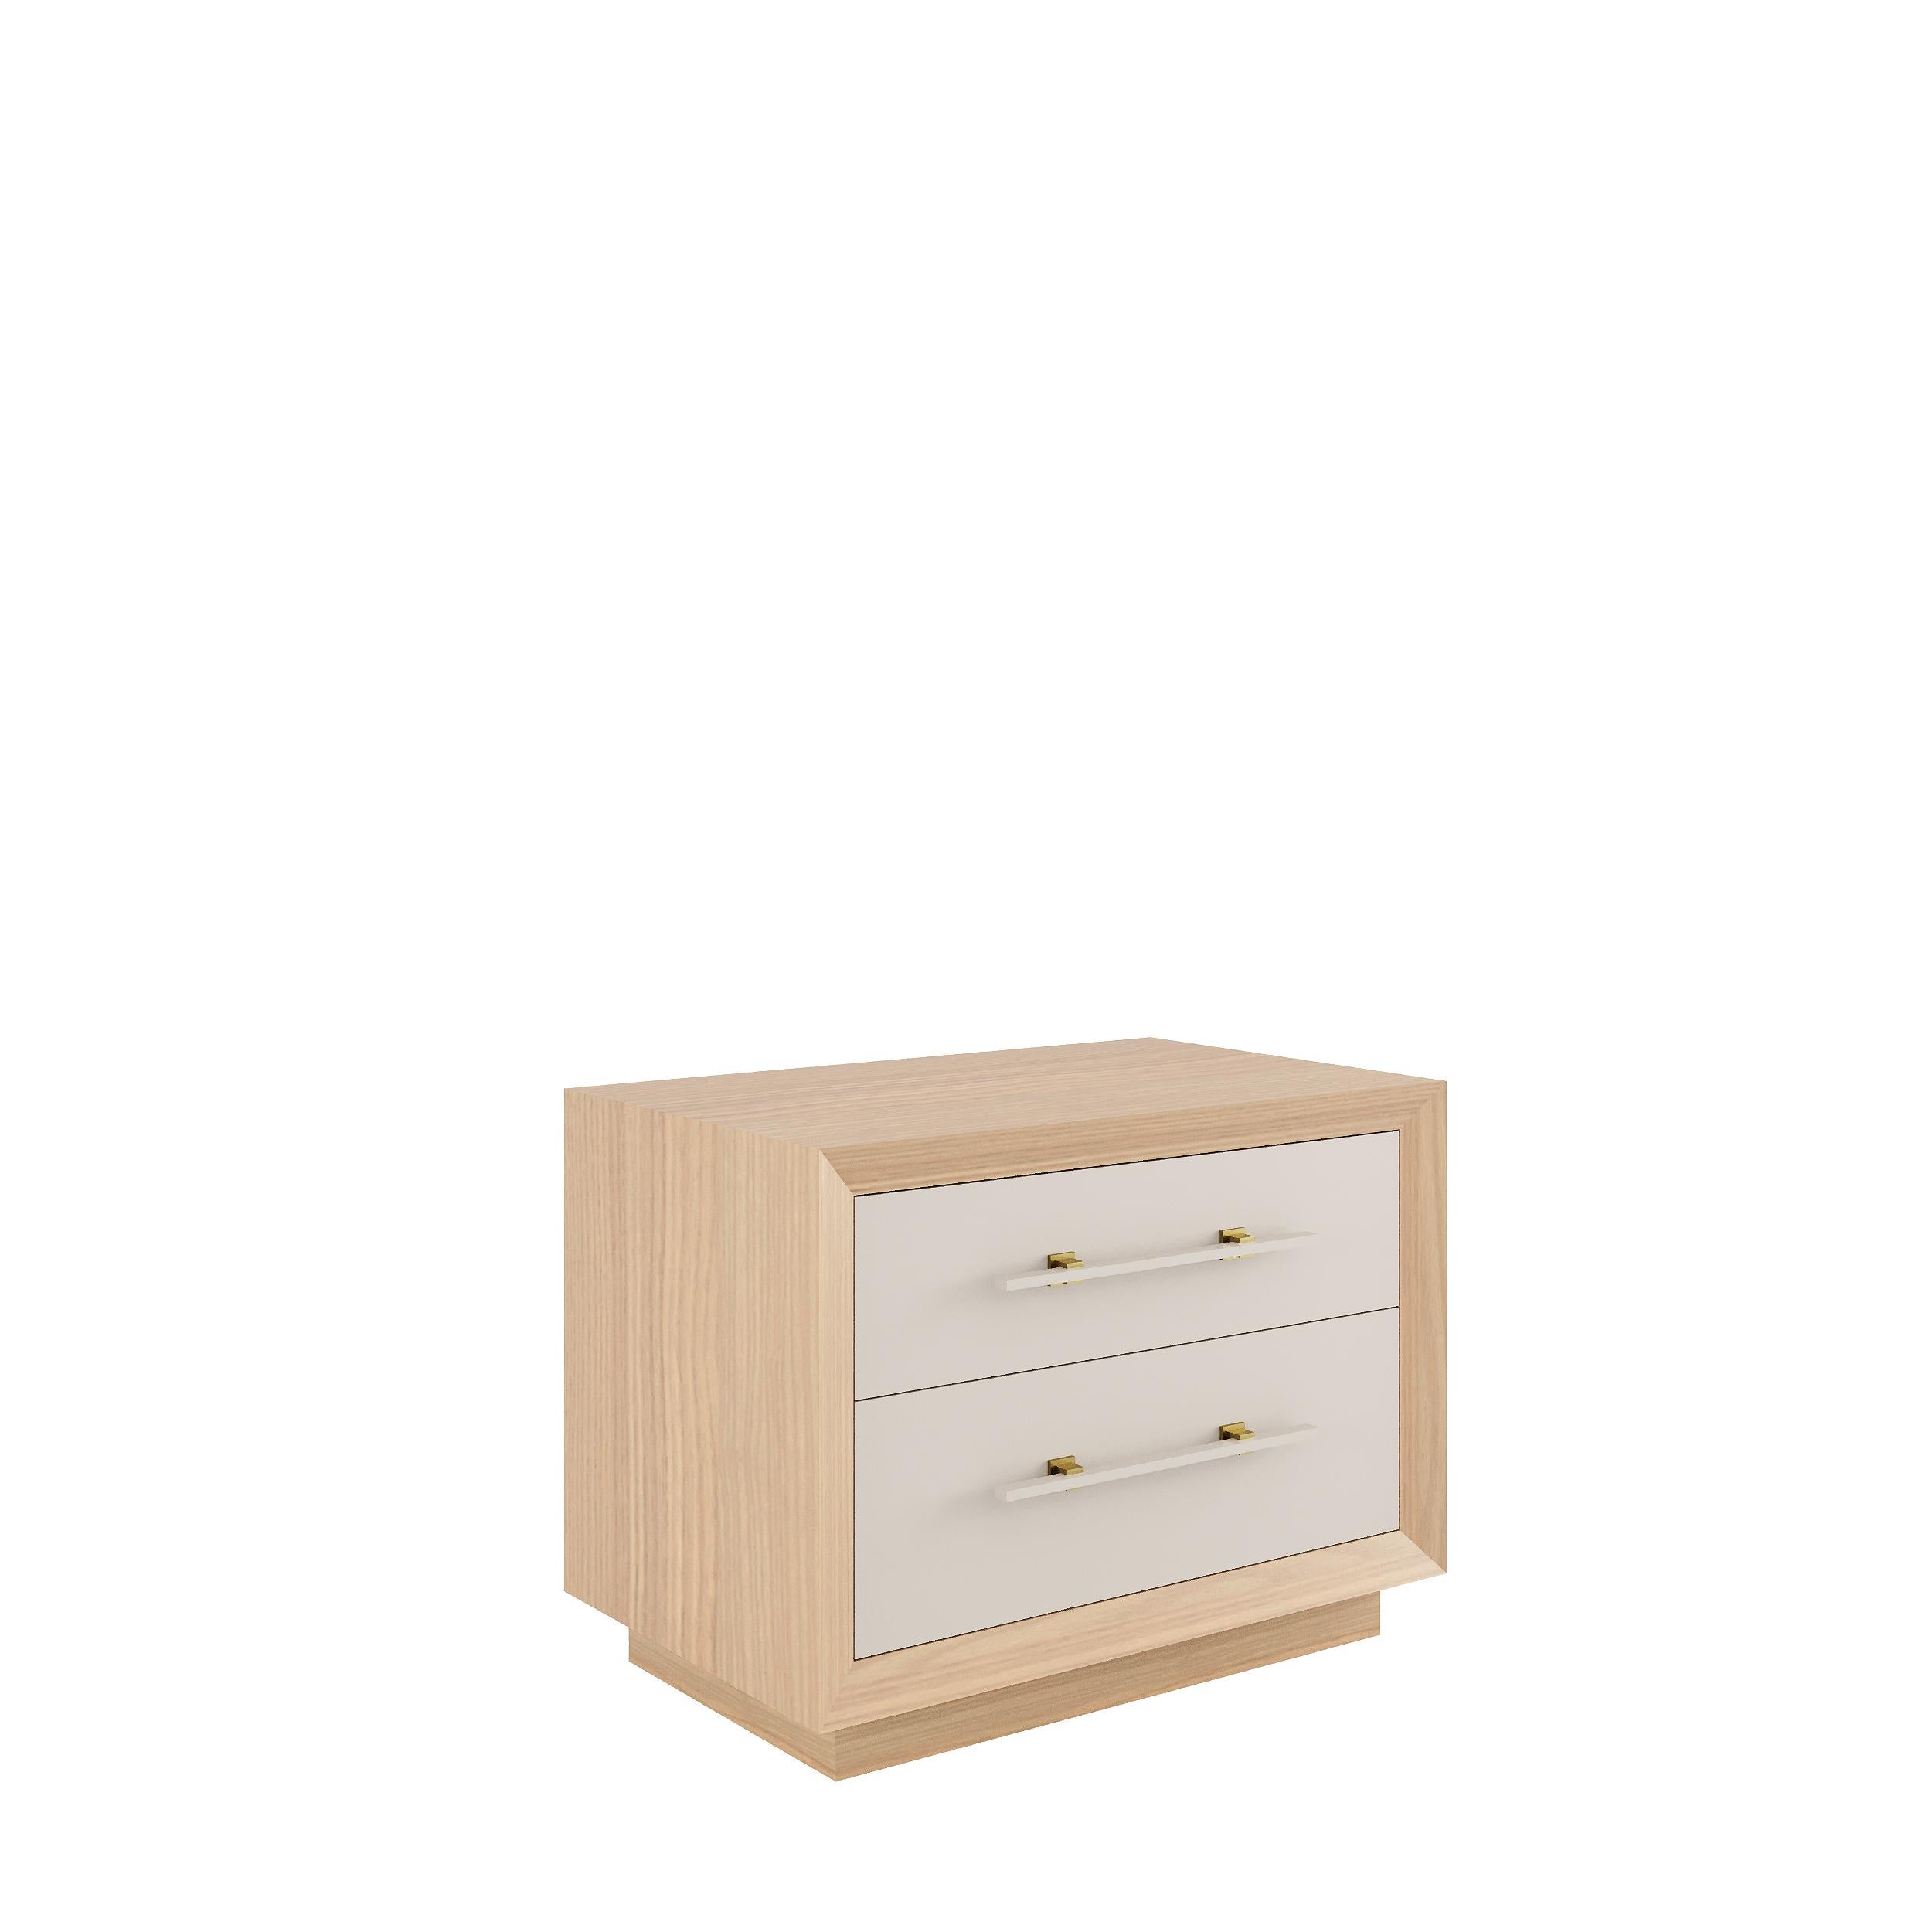 Wood MAGNA large nightstand - wooden base For Sale